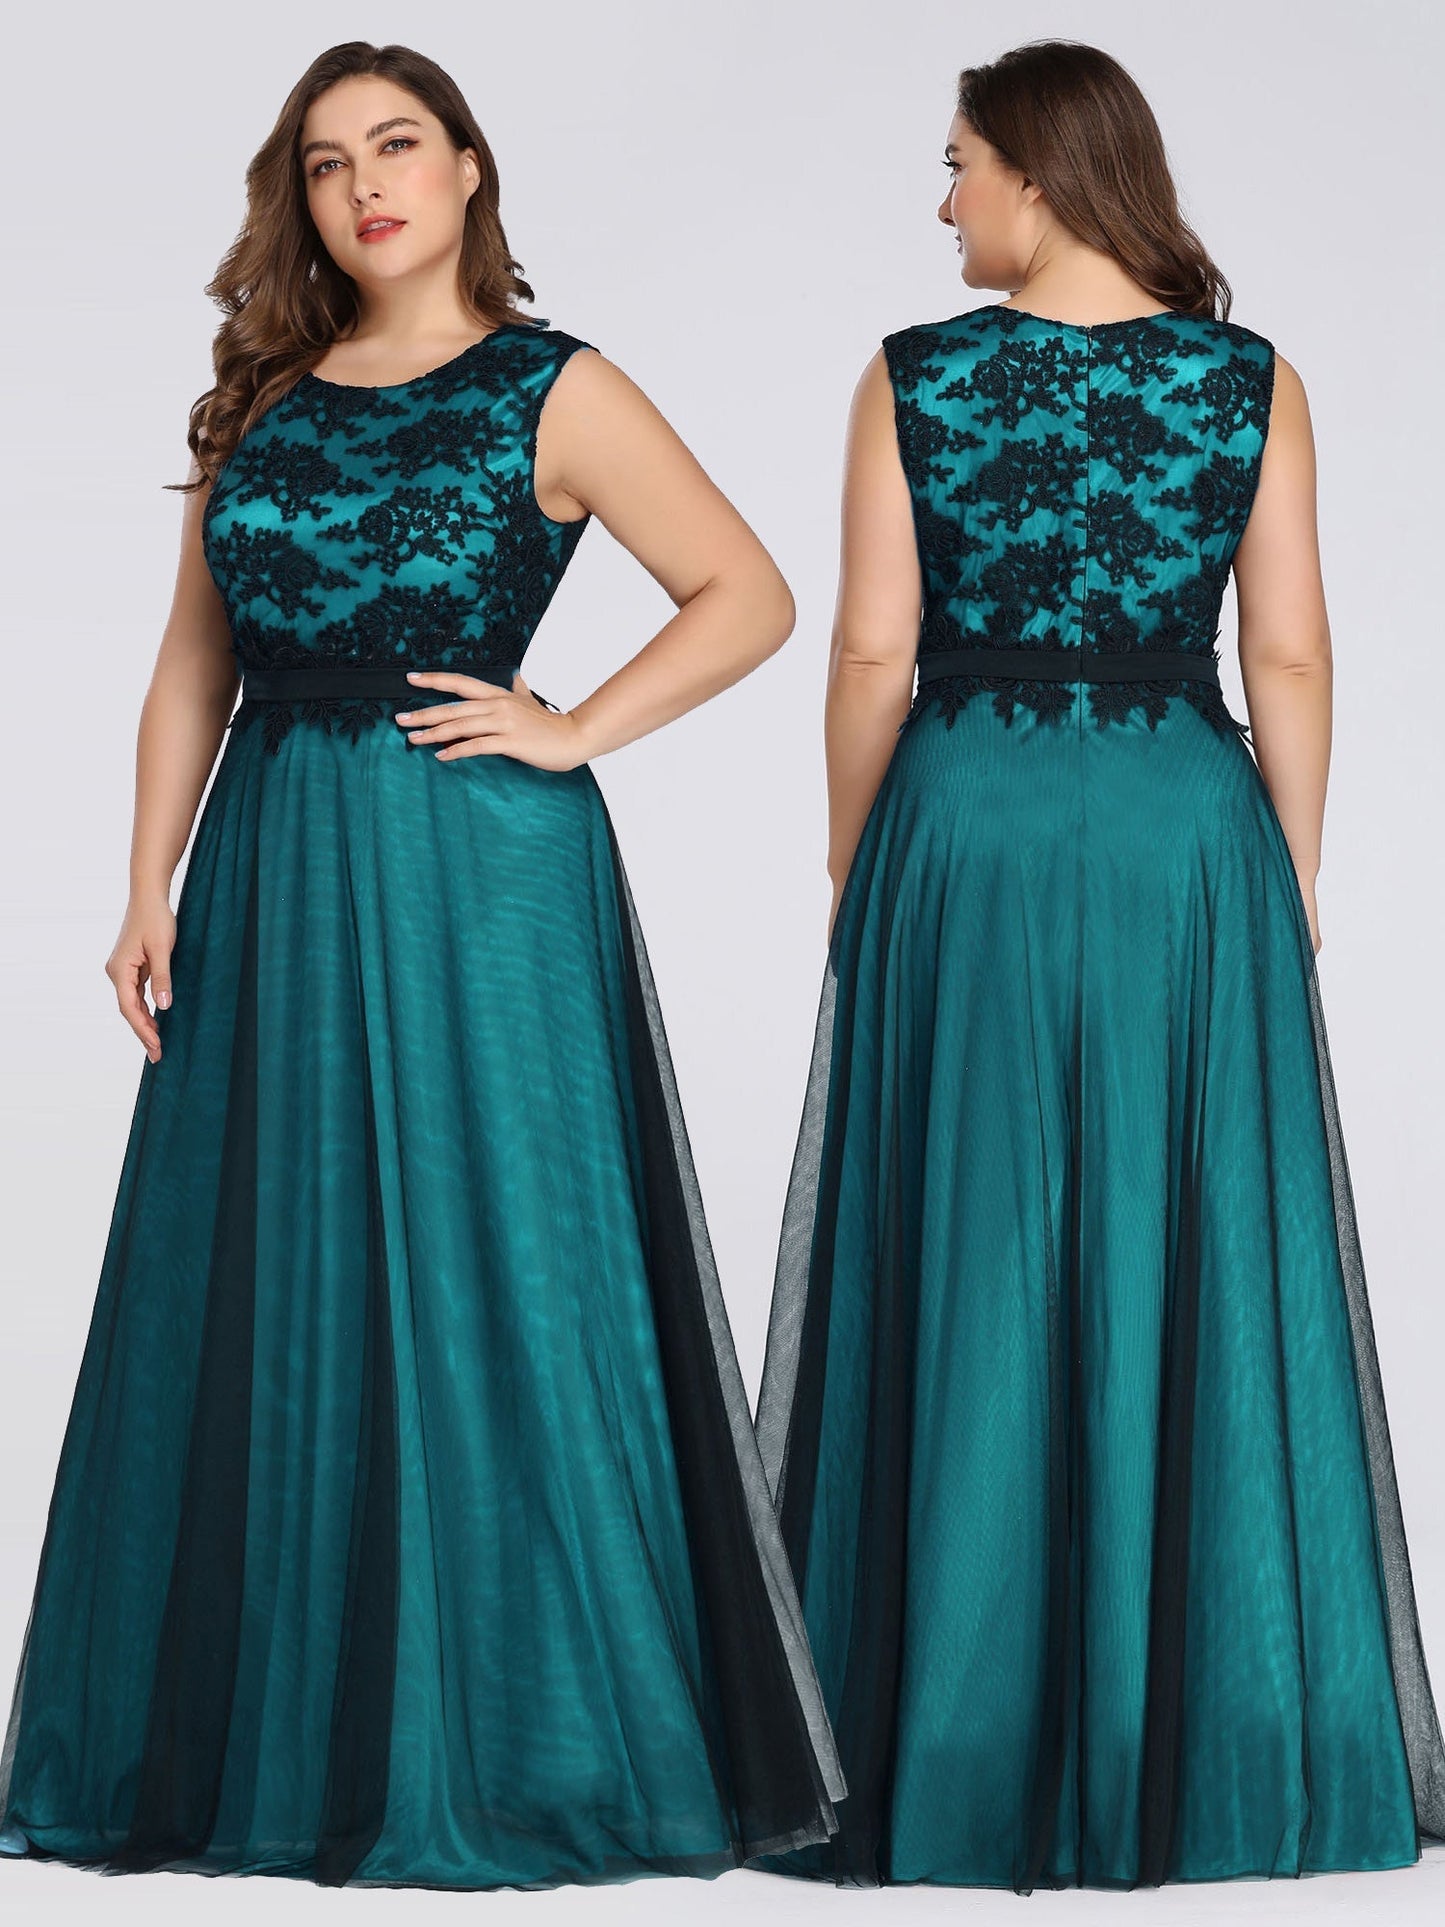 Dresses - A Line Sleeveless Lace Wholesale Evening Dress with Black Brocade - MsDressly